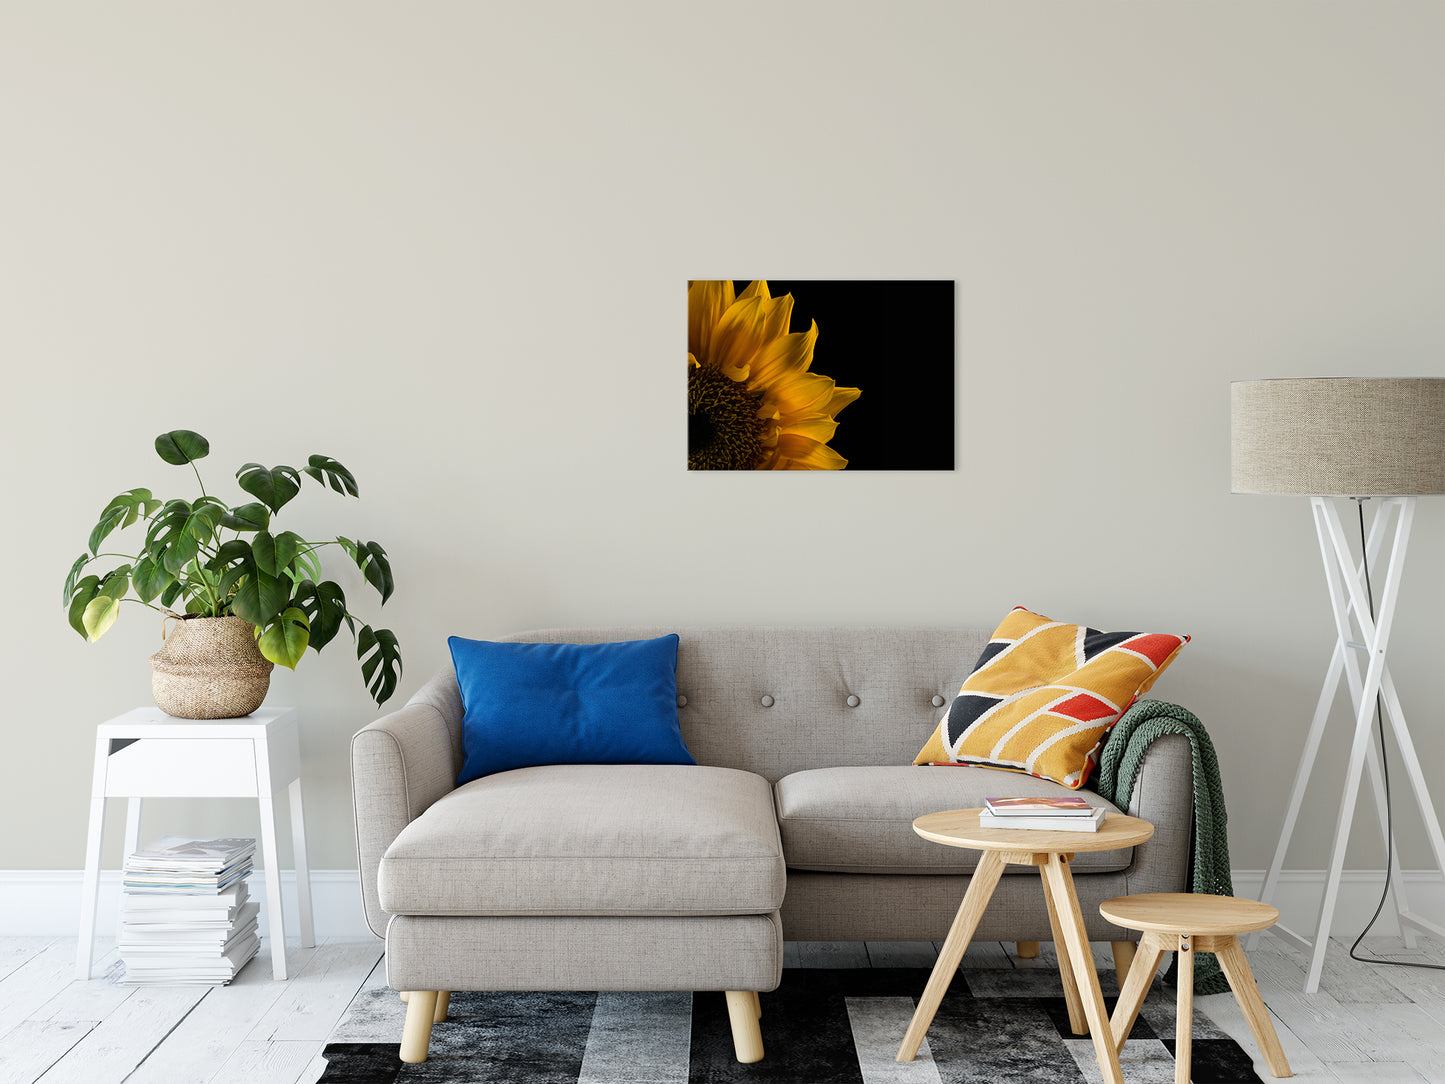 Sunflower in Corner Nature / Floral Photo Fine Art Canvas Wall Art Prints 20" x 24" - PIPAFINEART